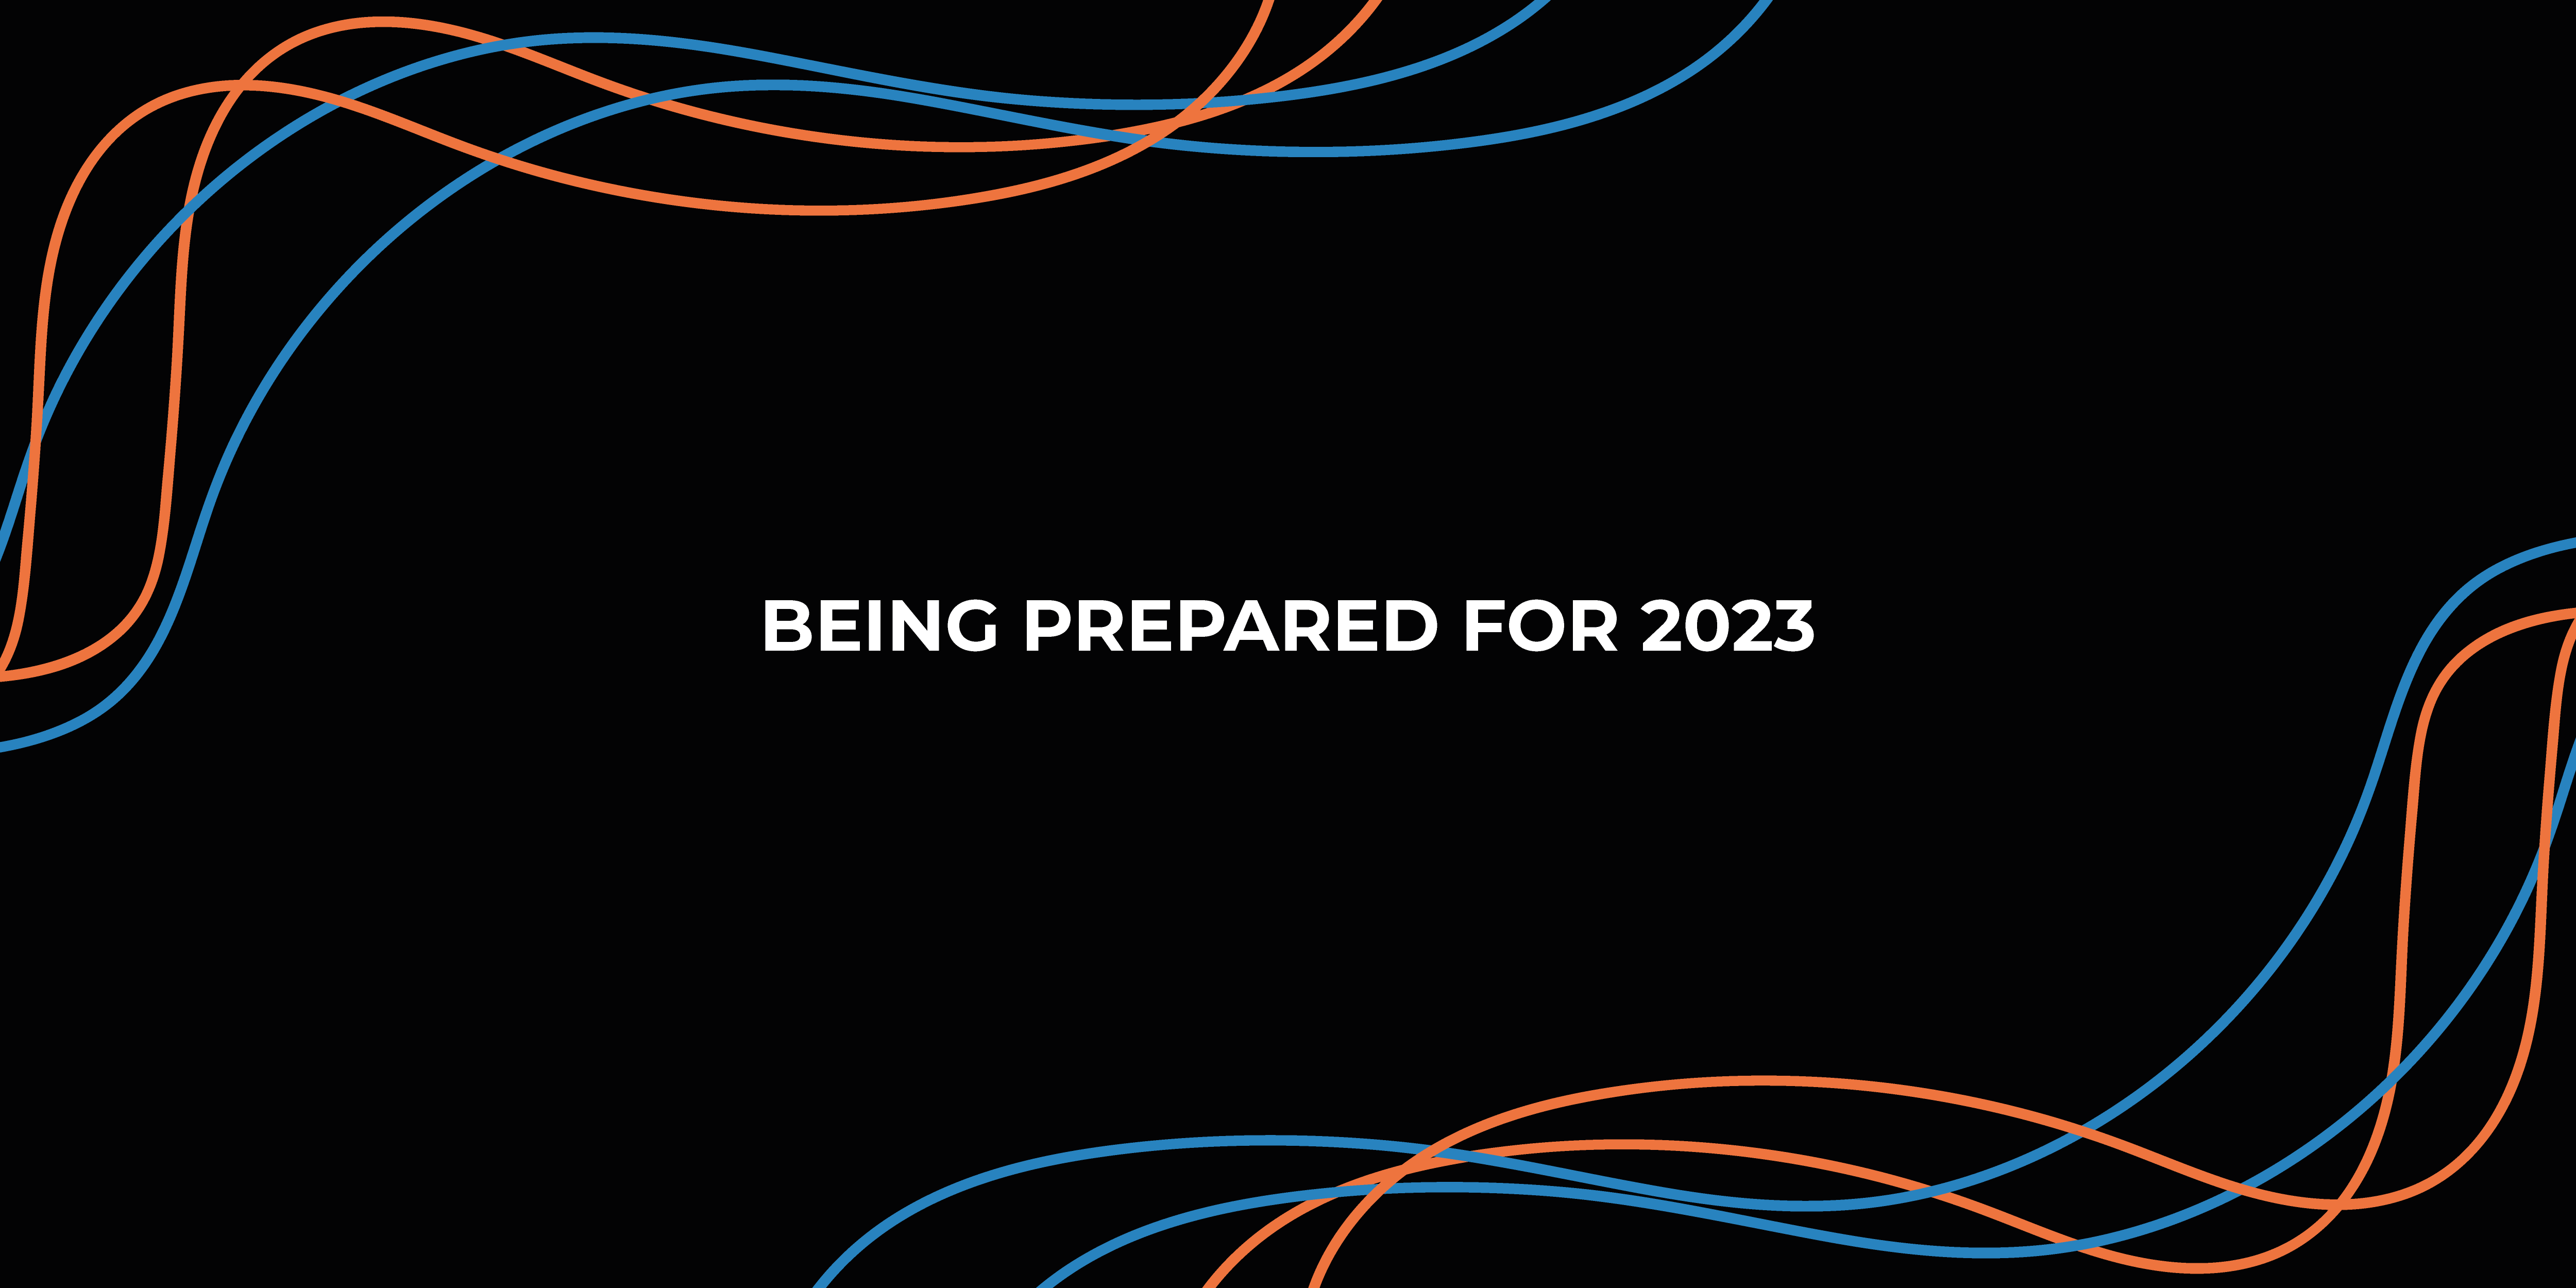 Being prepared for 2023